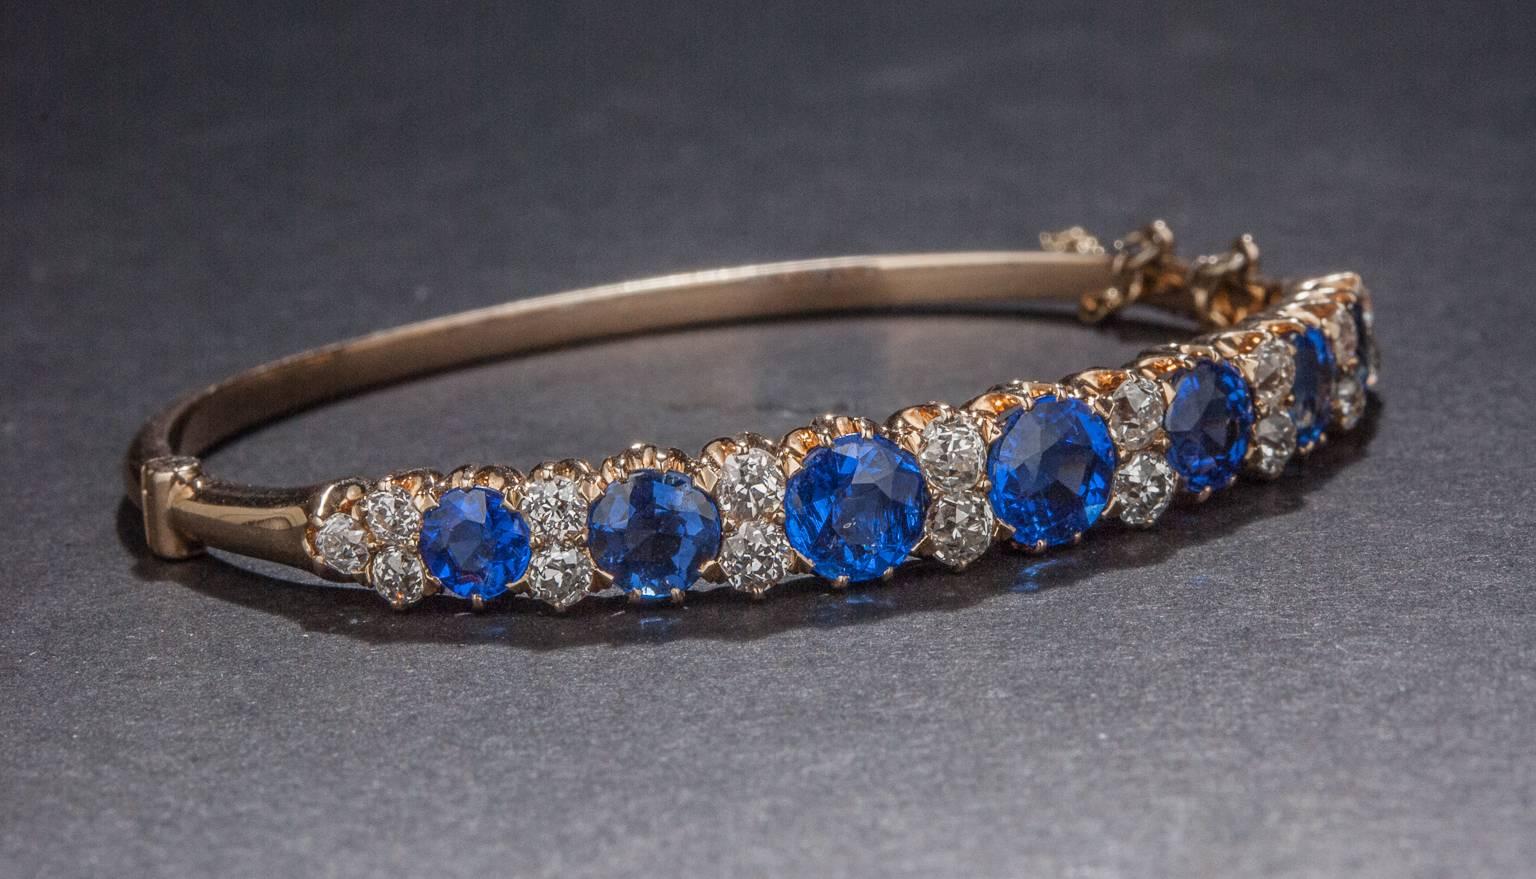 An exceptionally lovely bangle bracelet, crafted circa 1900s. This unique piece features 2.50 total carats of diamonds and 7 beautiful synthetic blue stones (which are original to the piece and to the era). This piece is made in 14k yellow gold.